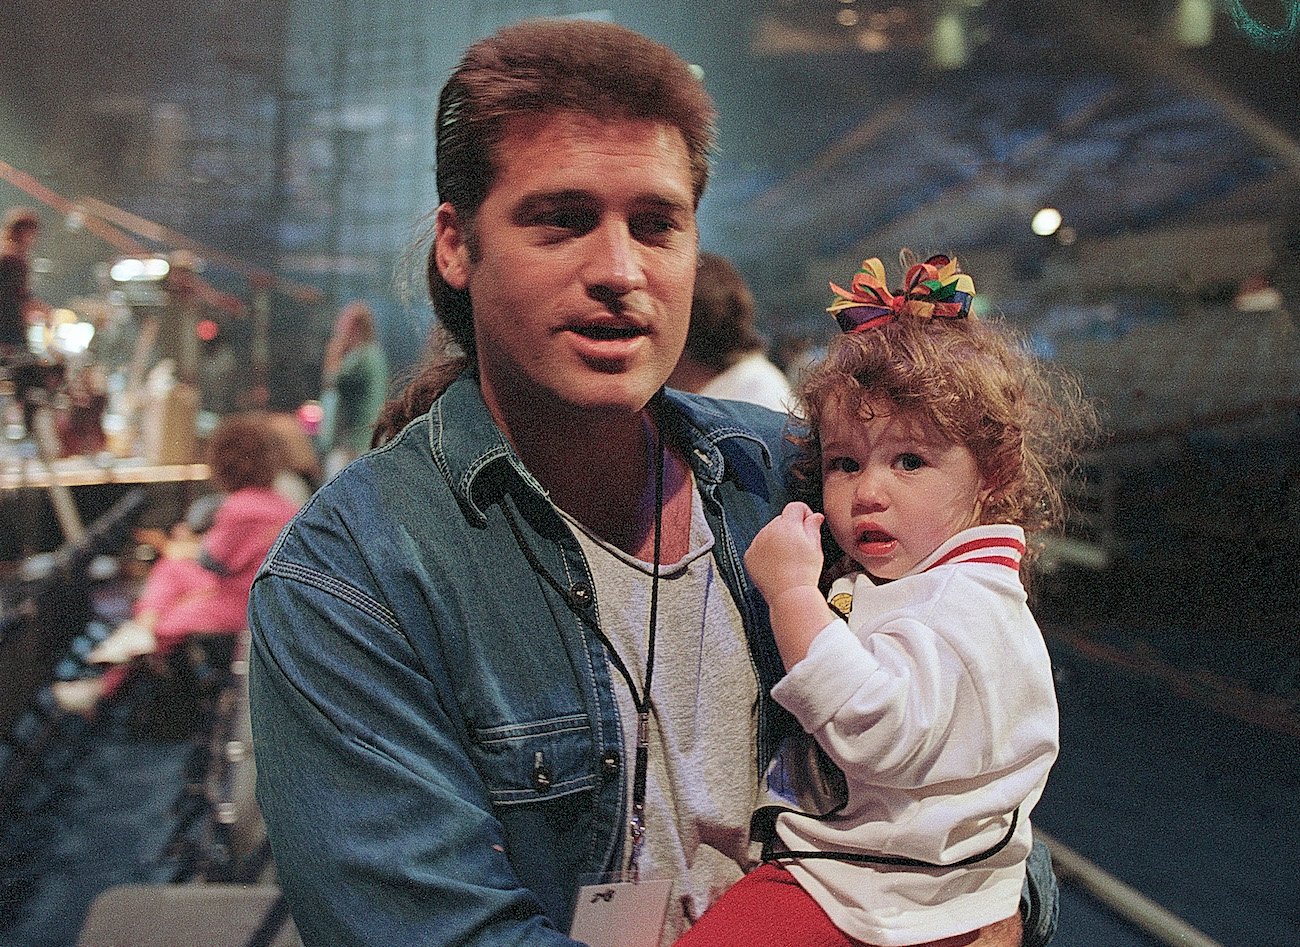 Billy Ray Cyrus holding toddler Miley Cyrus in 1994